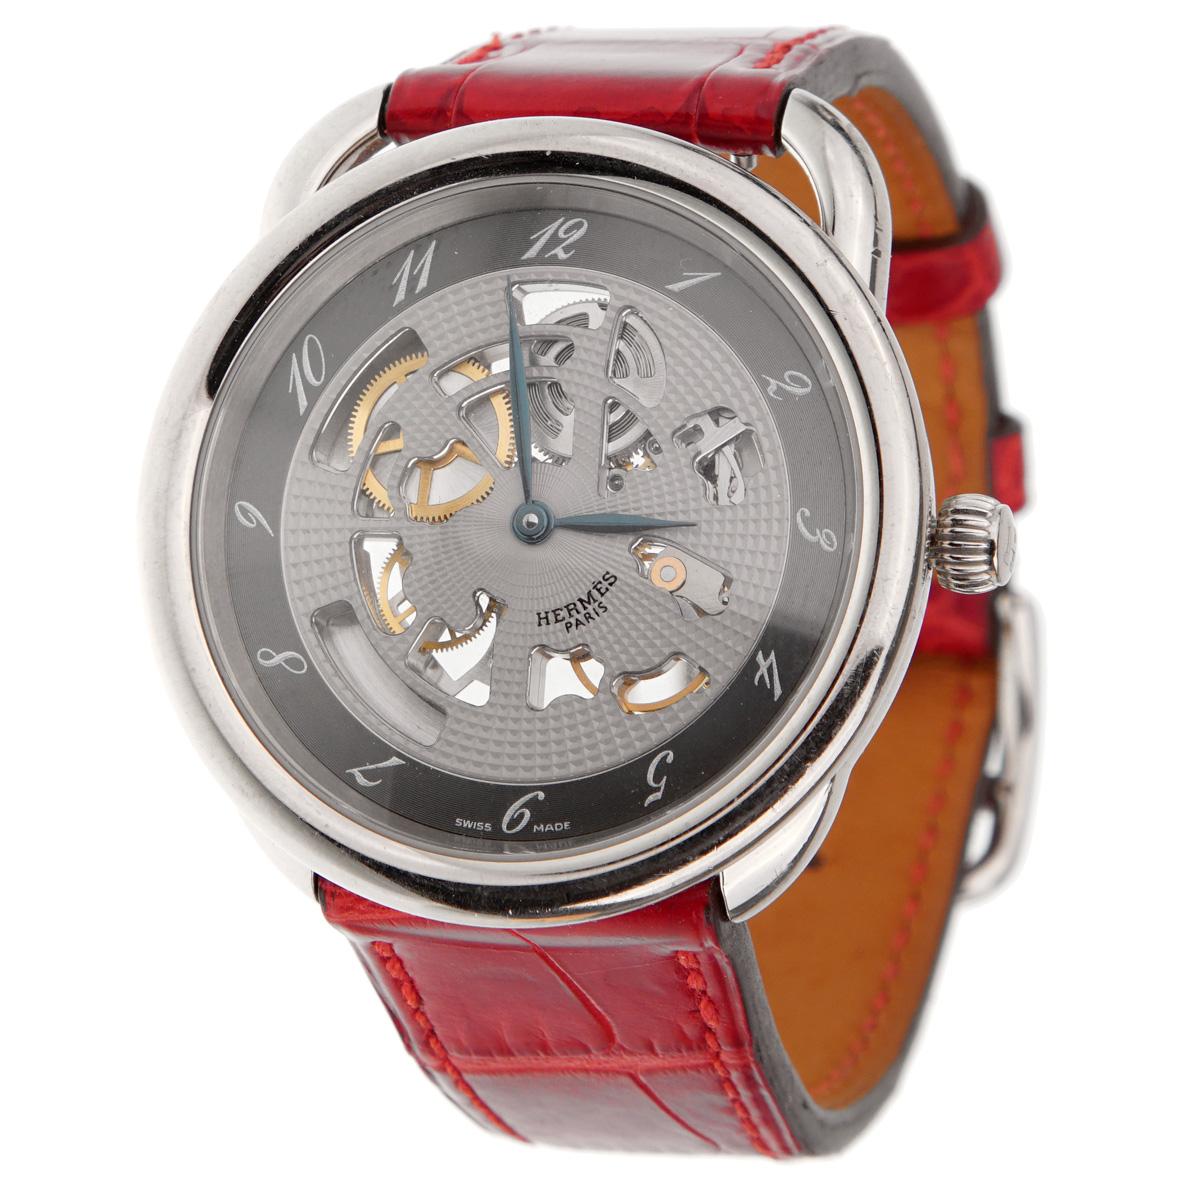 Hermes Anniversary Limited Edition Arceau White Gold Watch